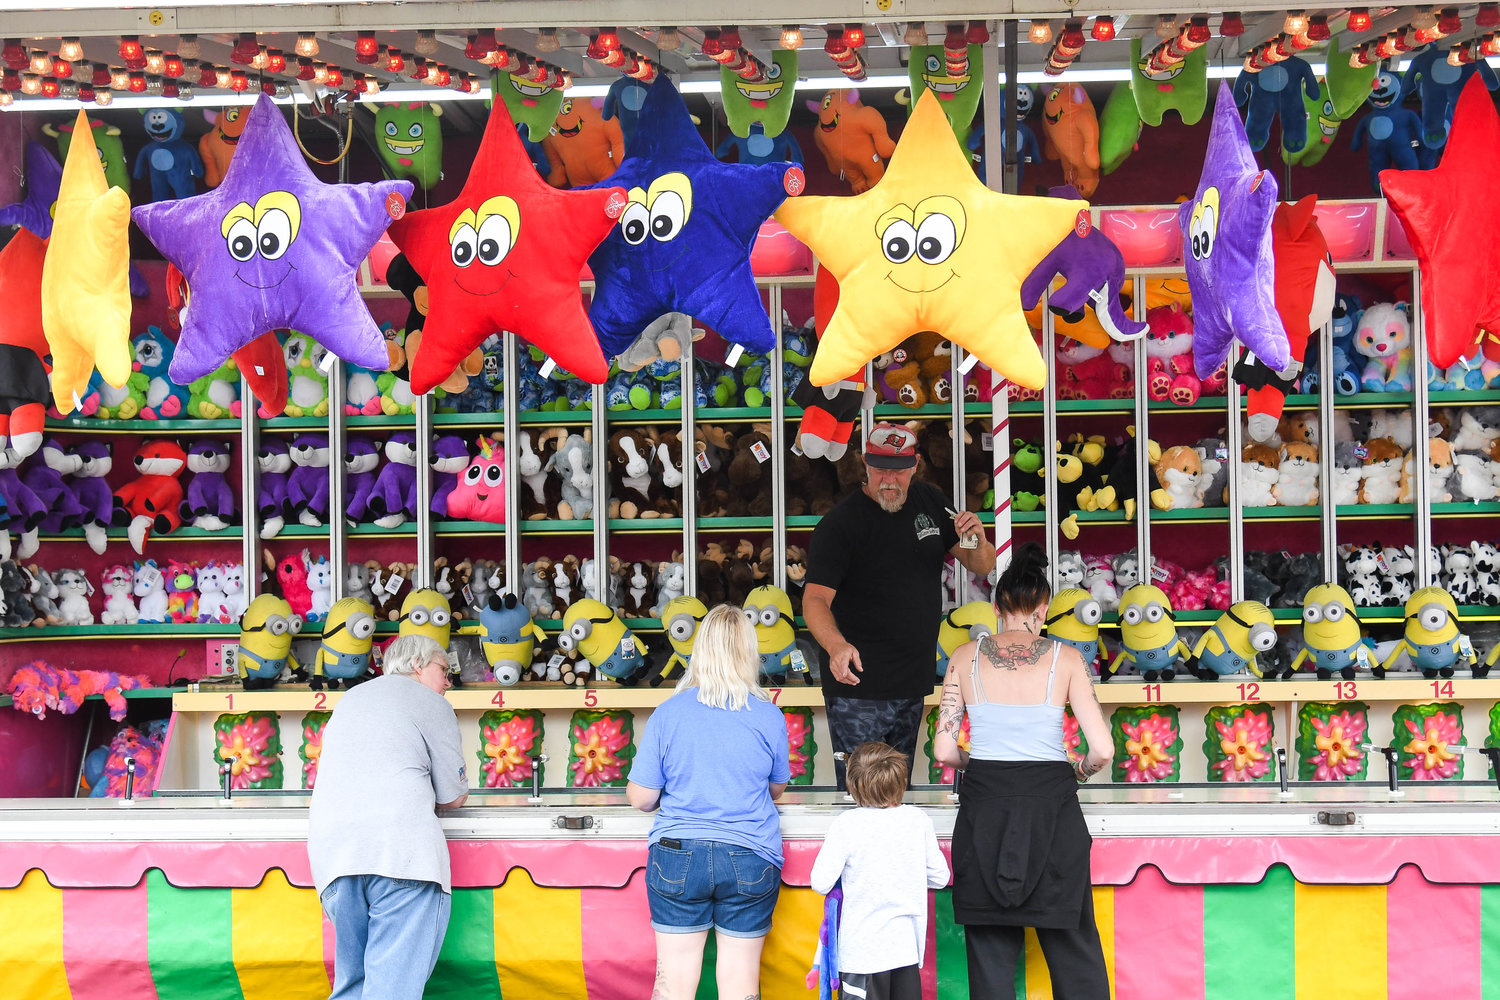 Fairgoers play games on Thursday at the Herkimer County Fair in Frankfort.